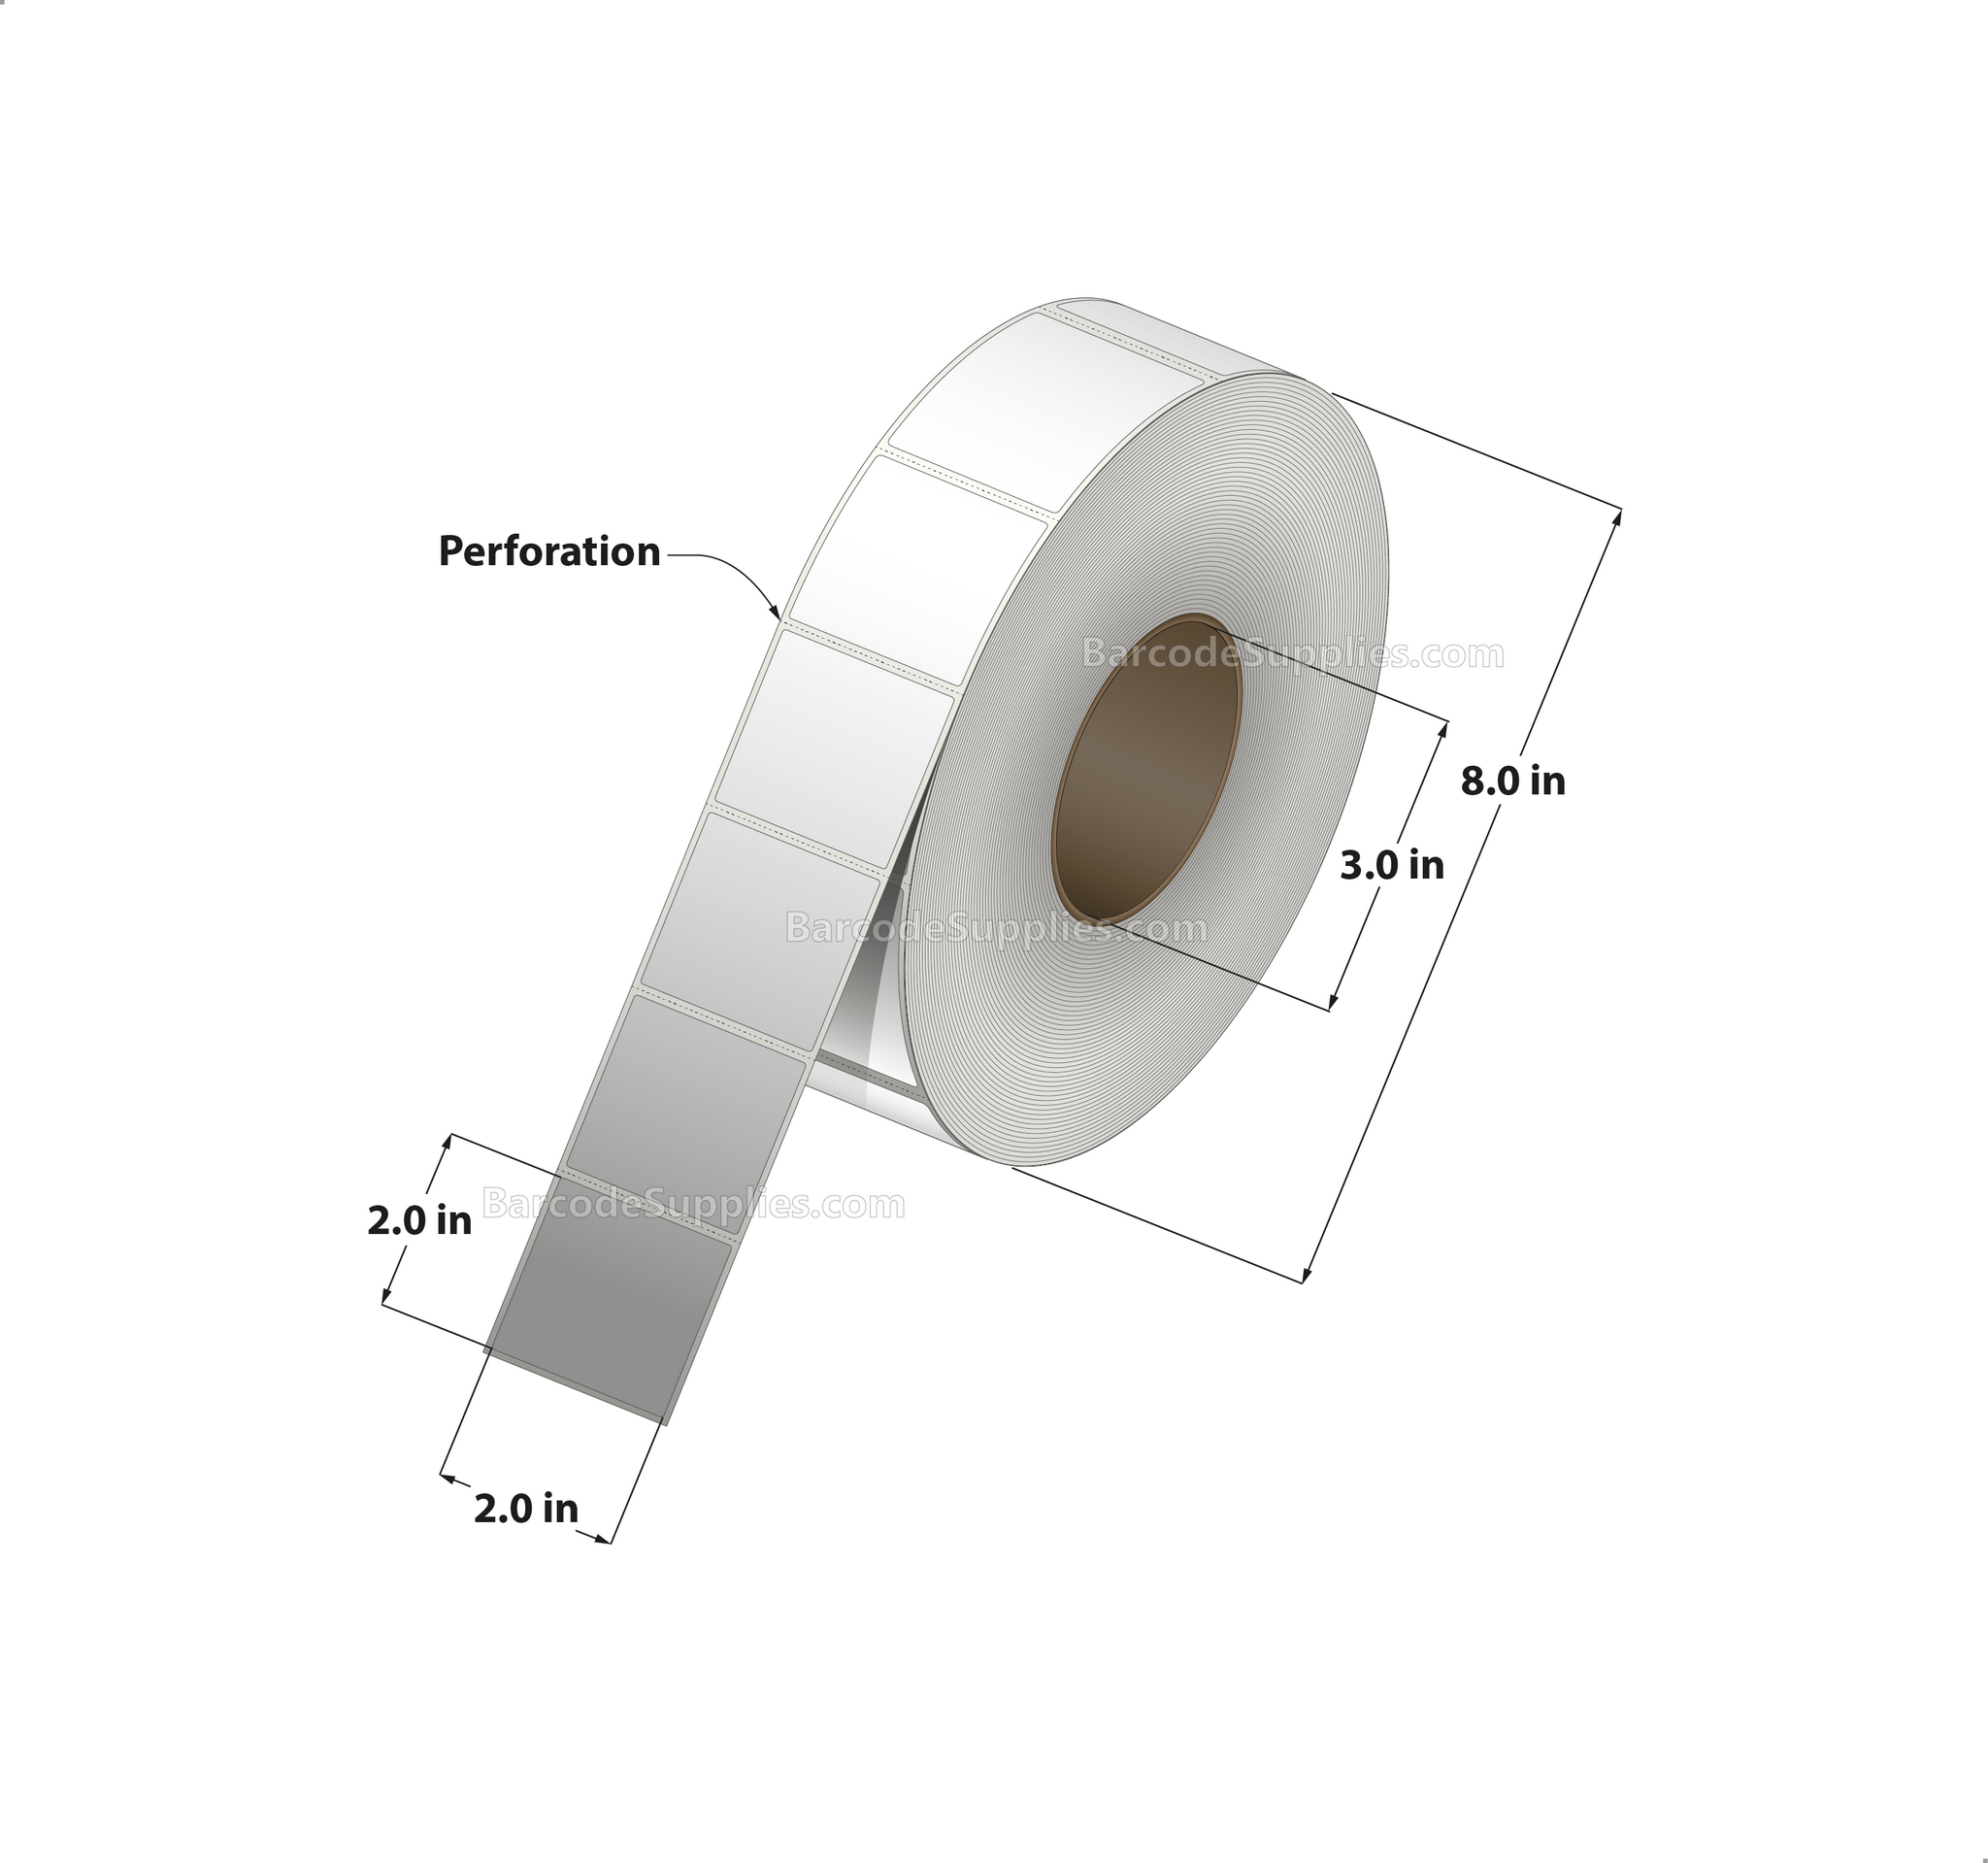 2 x 2 Thermal Transfer White Labels With Permanent Adhesive - Perforated - 2900 Labels Per Roll - Carton Of 8 Rolls - 23200 Labels Total - MPN: RT-2-2-2900-3